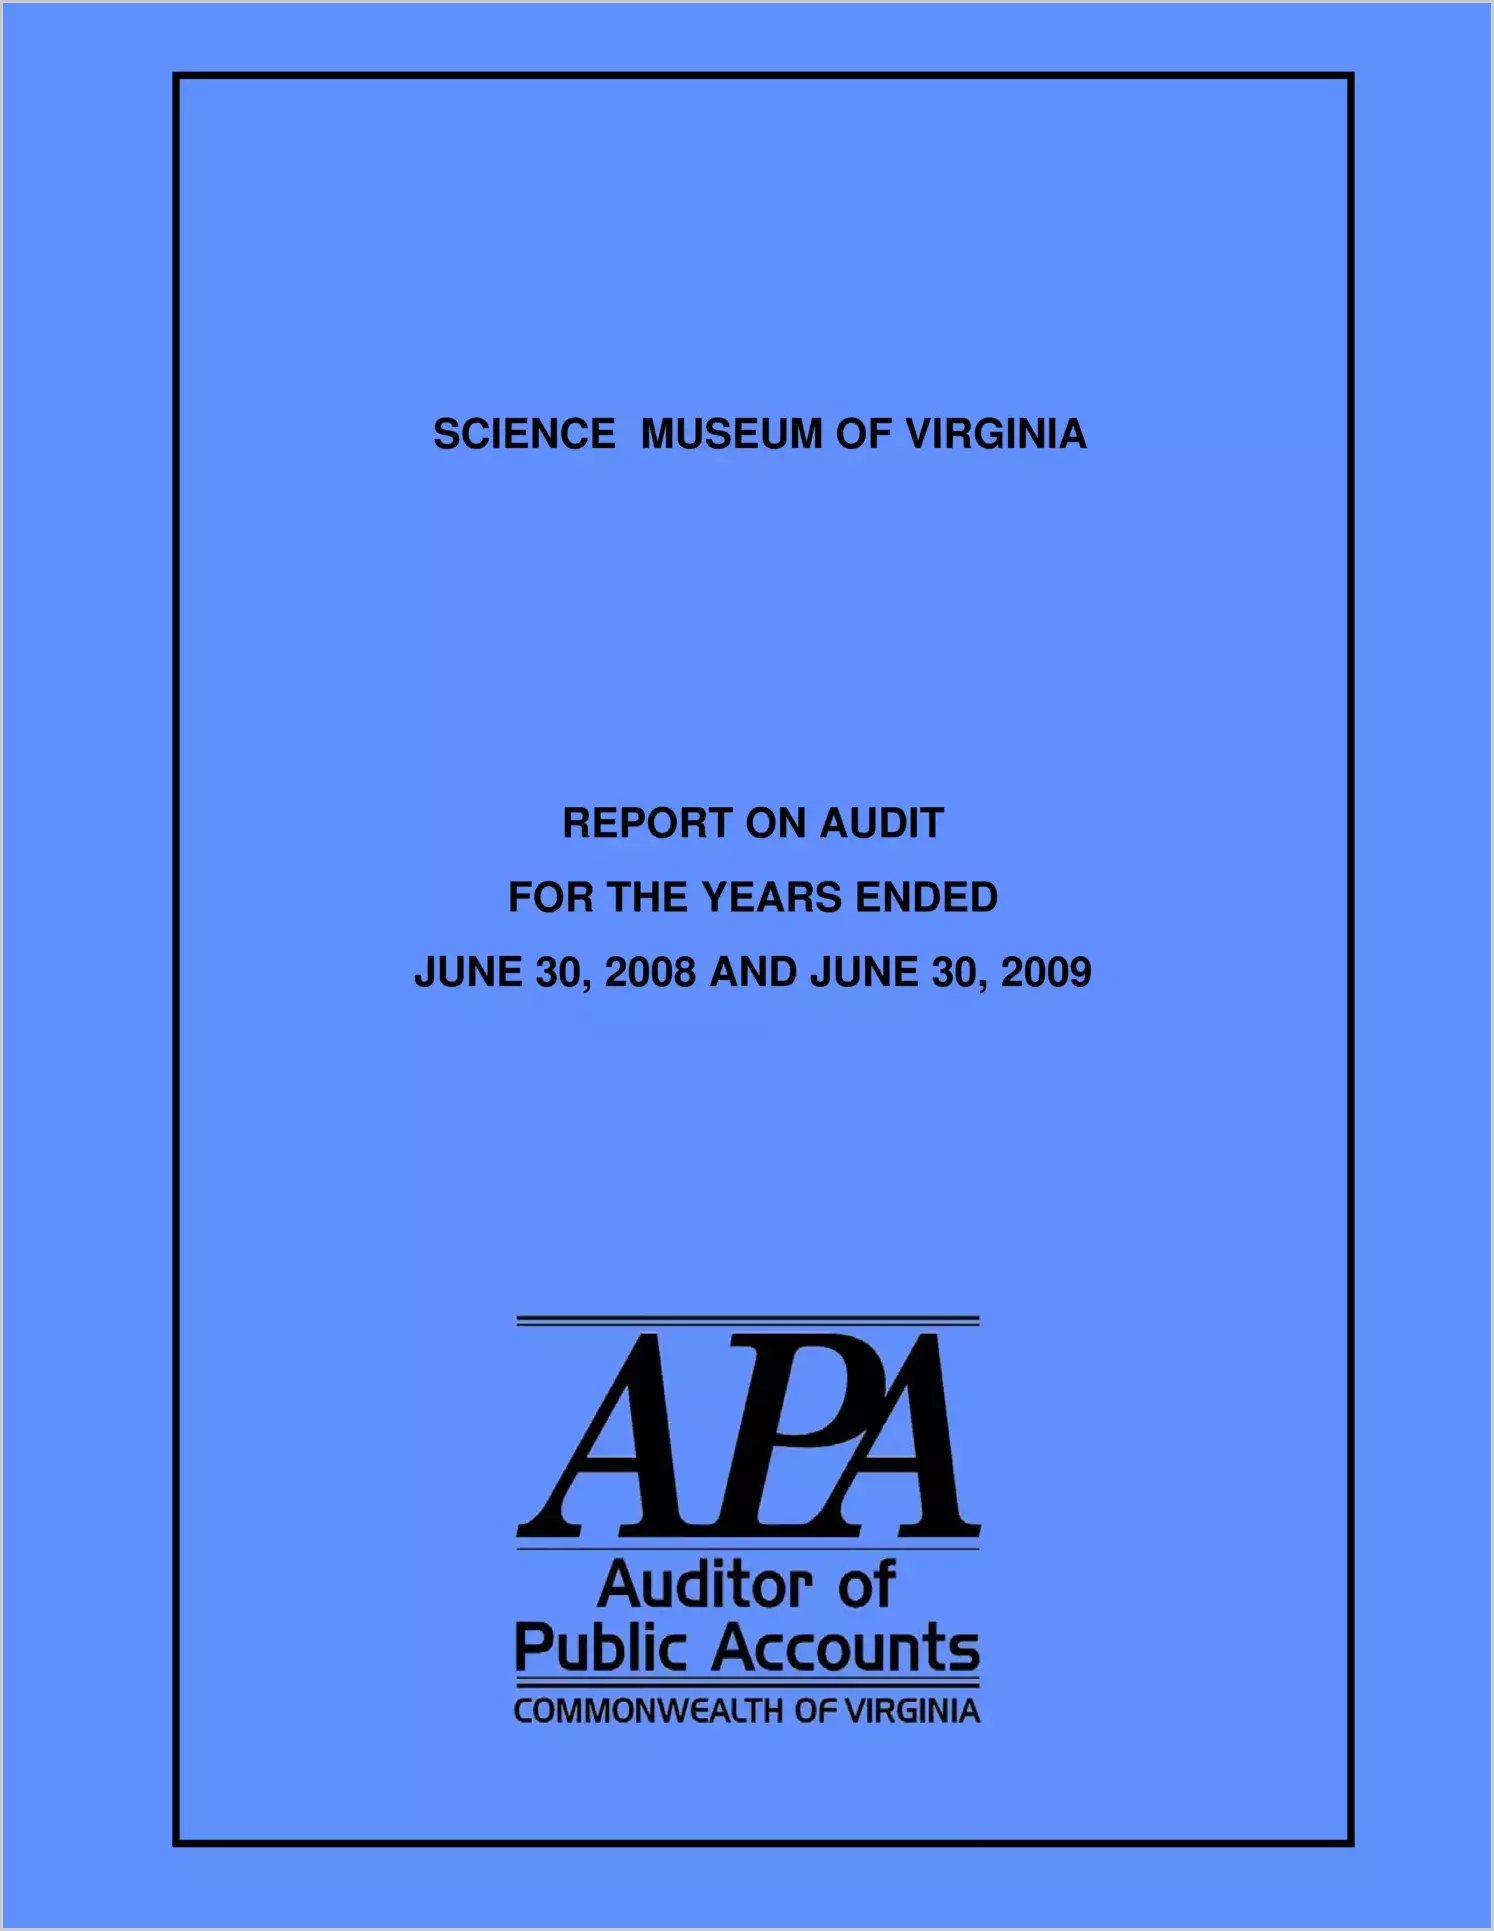 Science Museum of Virginia Report on Audit for the years ended June 30, 2008 and June 30, 2009